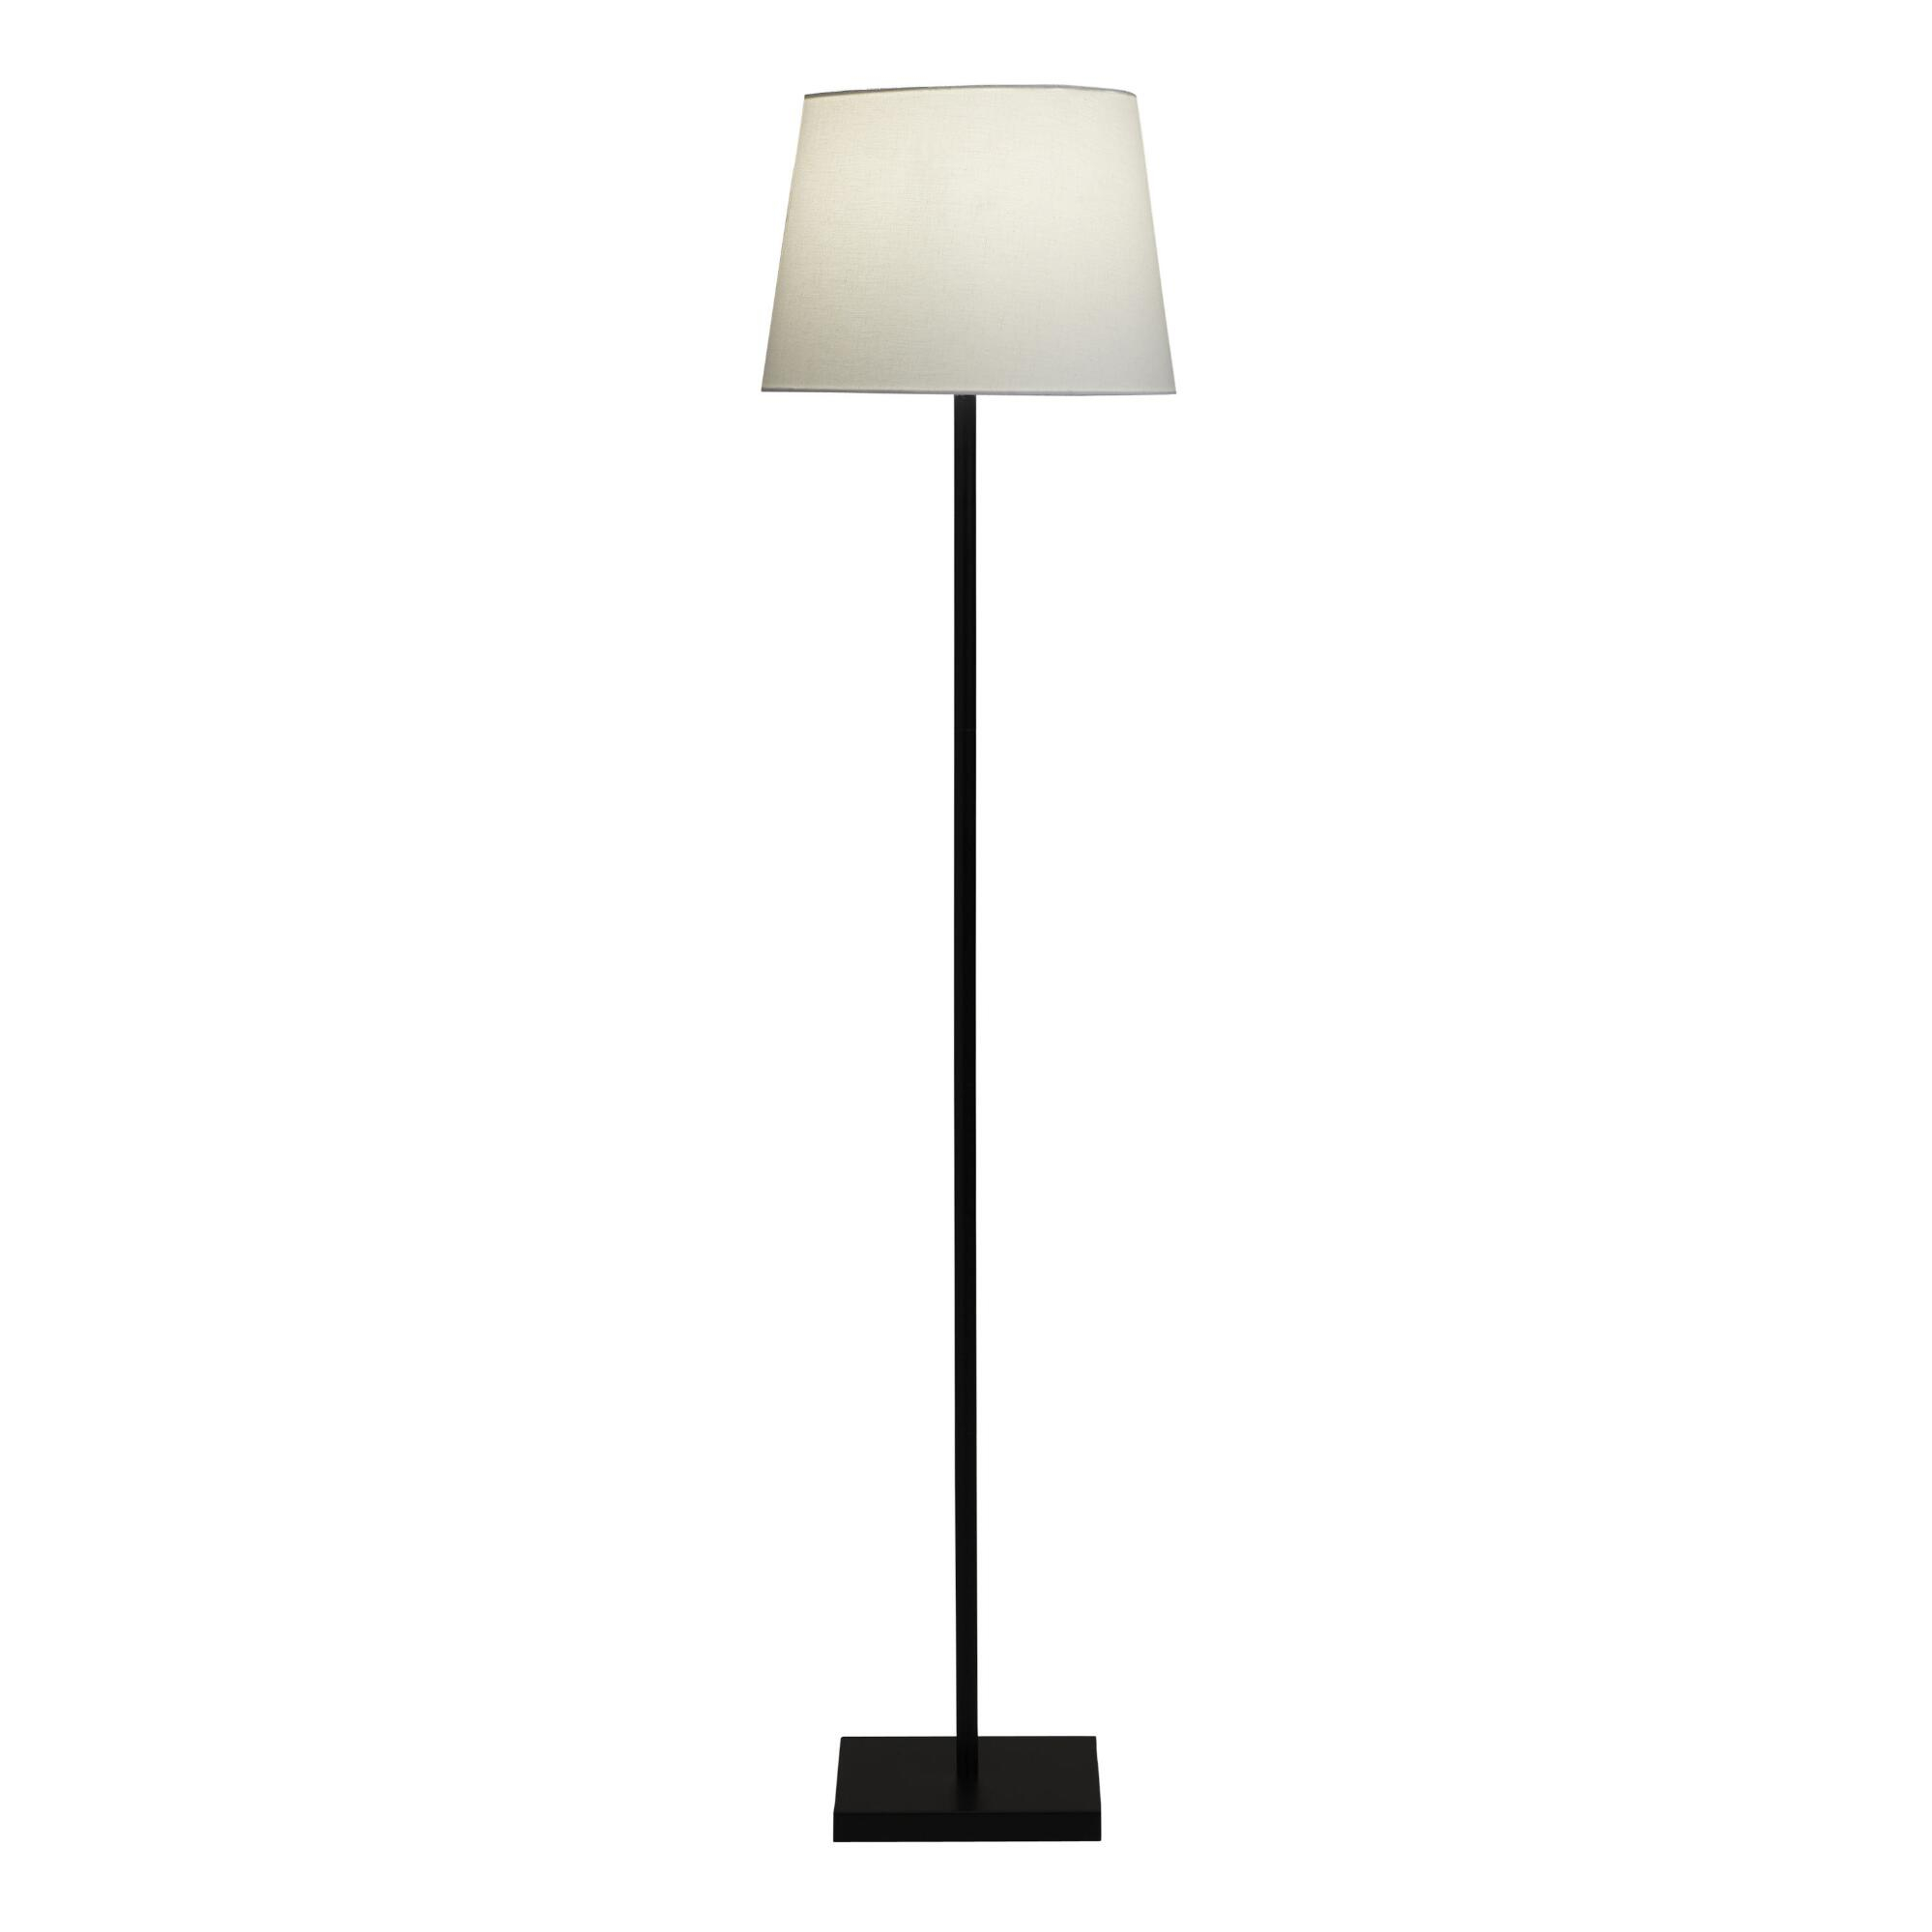 Rustic Black Metal Manvi Floor Lamp With Shade White inside size 1999 X 1999